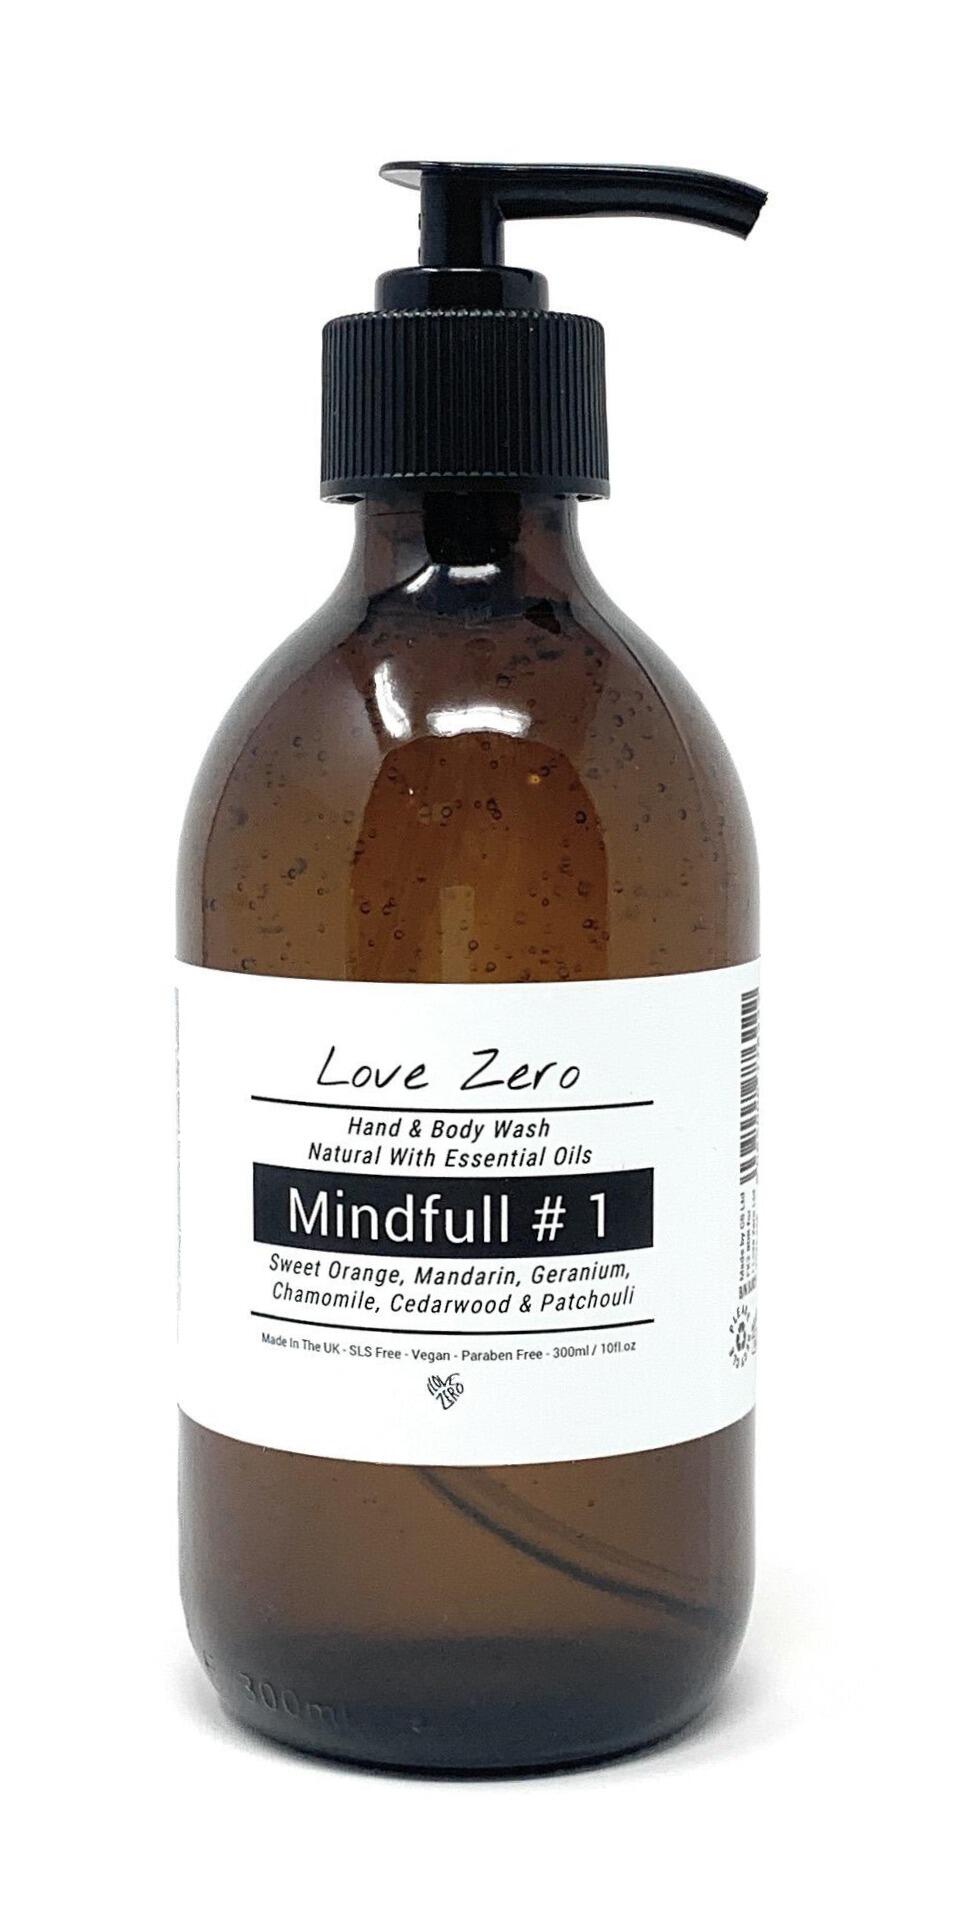 Mindfull Number 1 - Hand and Body Wash 300ml